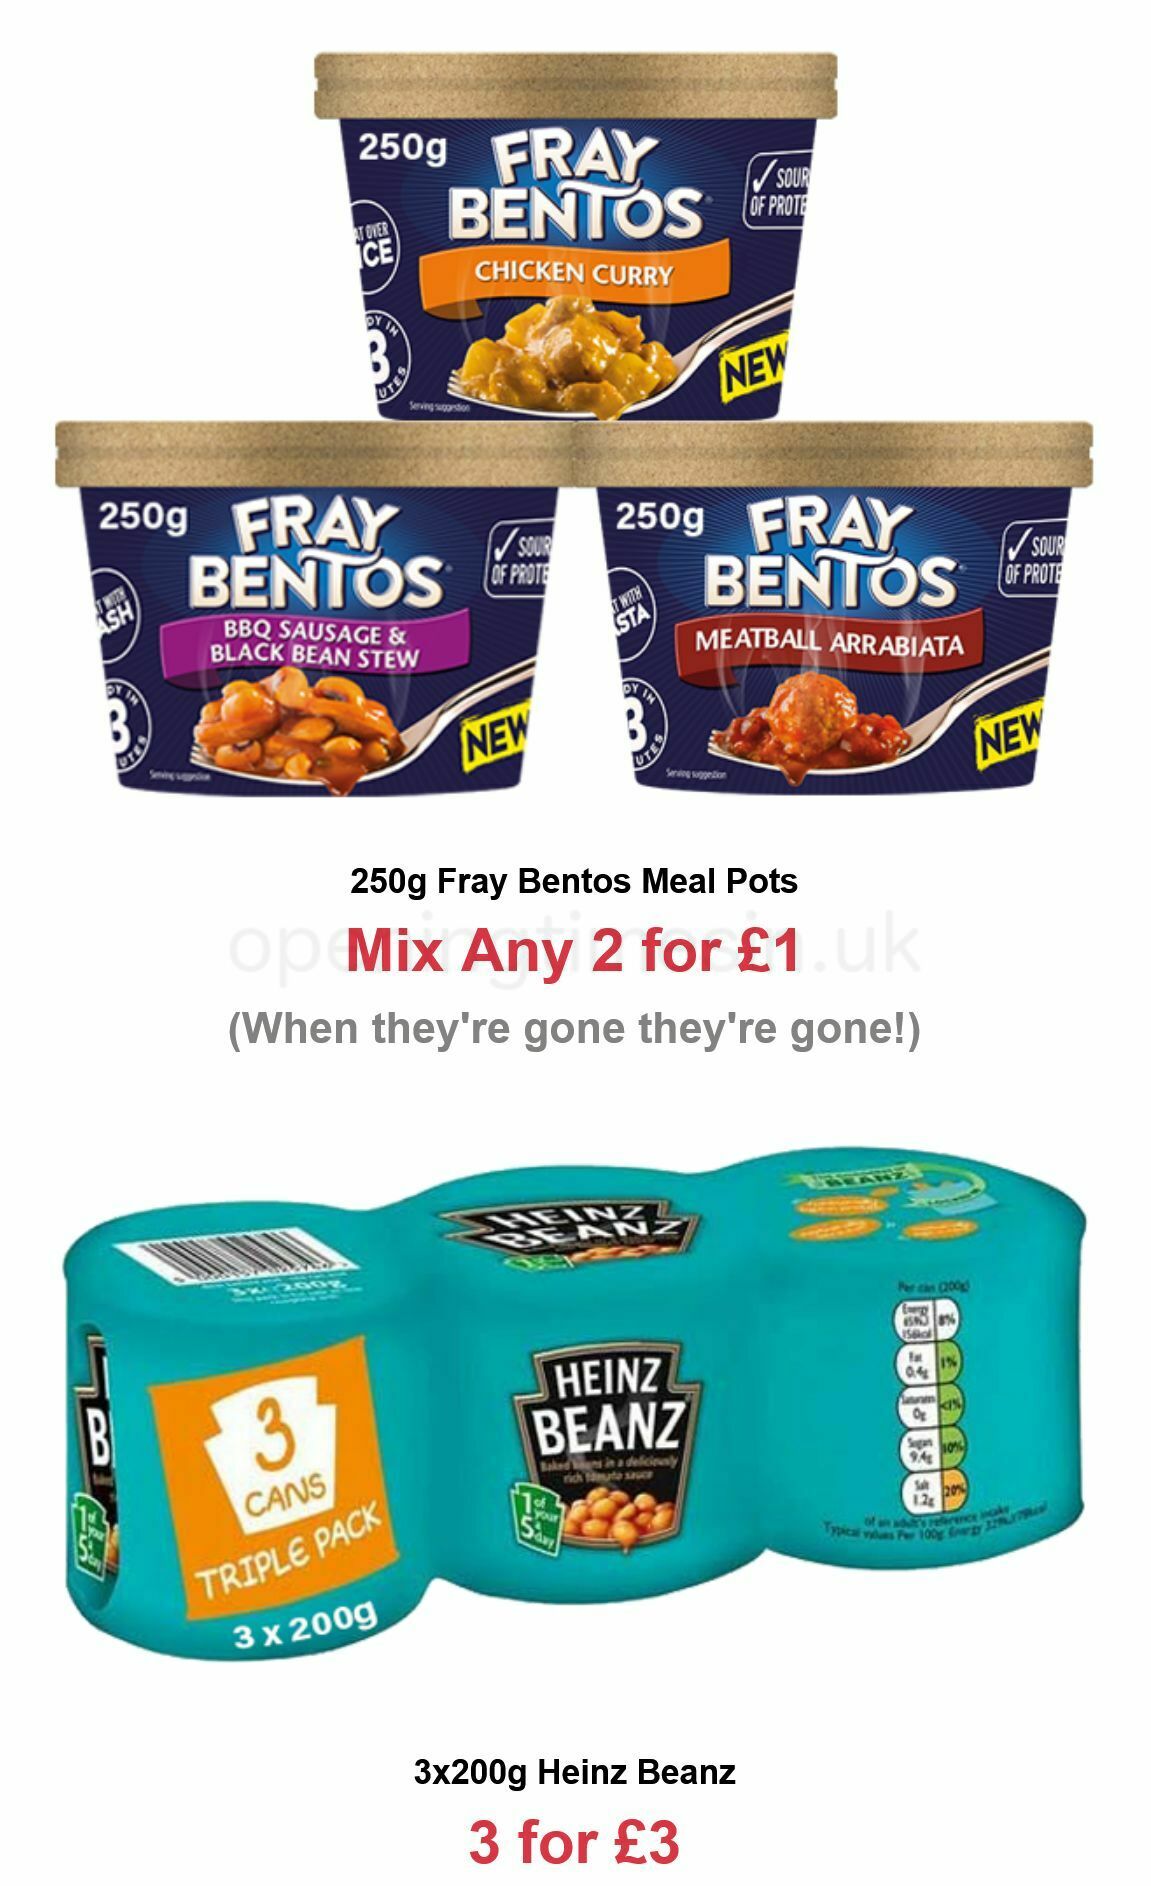 Farmfoods Offers from 3 November